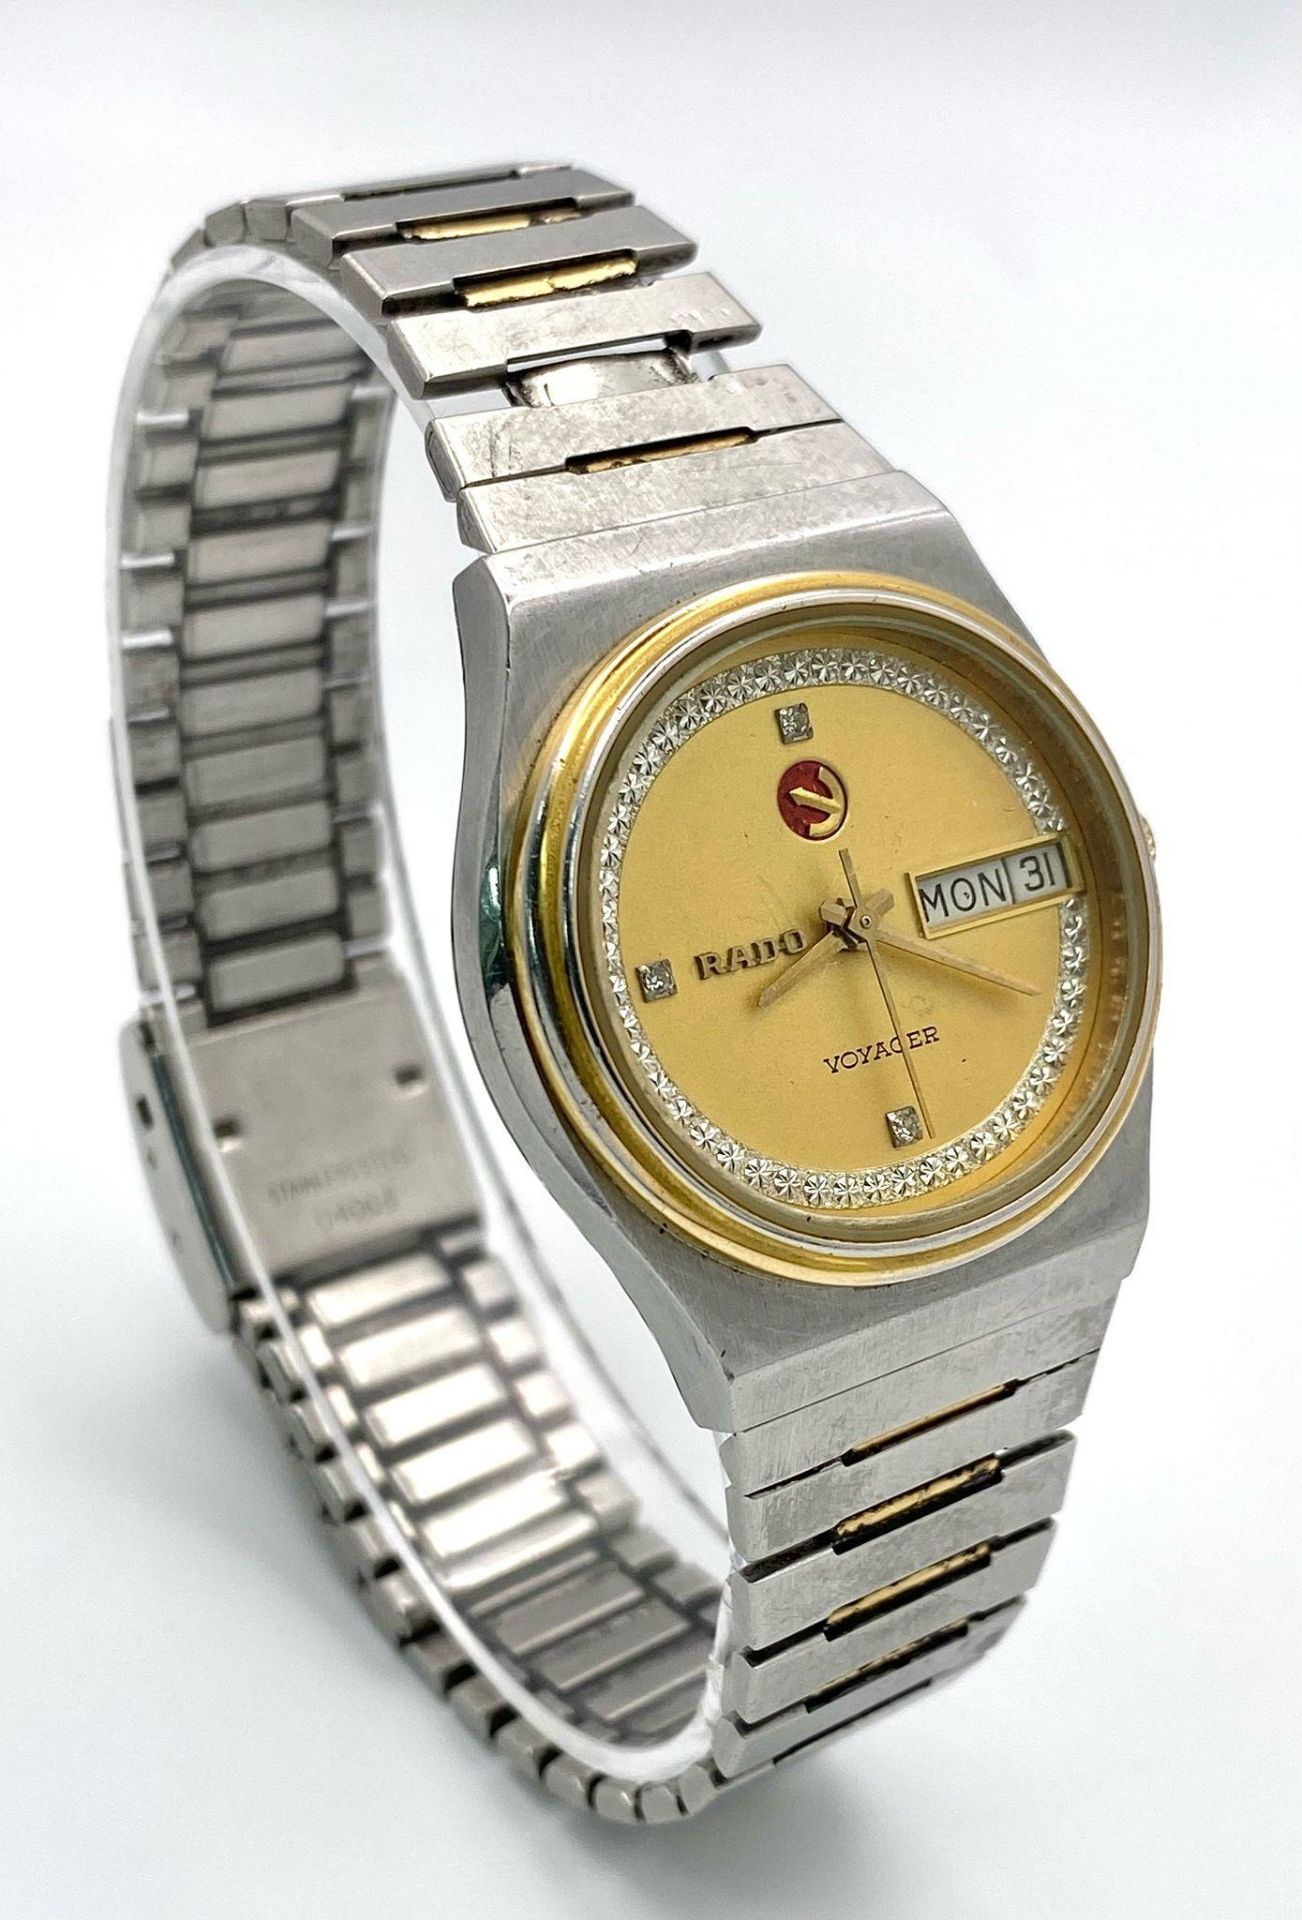 A Vintage Rado Voyager Automatic Unisex Watch. Stainless steel bracelet and case - 33mm. Gilded dial - Bild 2 aus 7